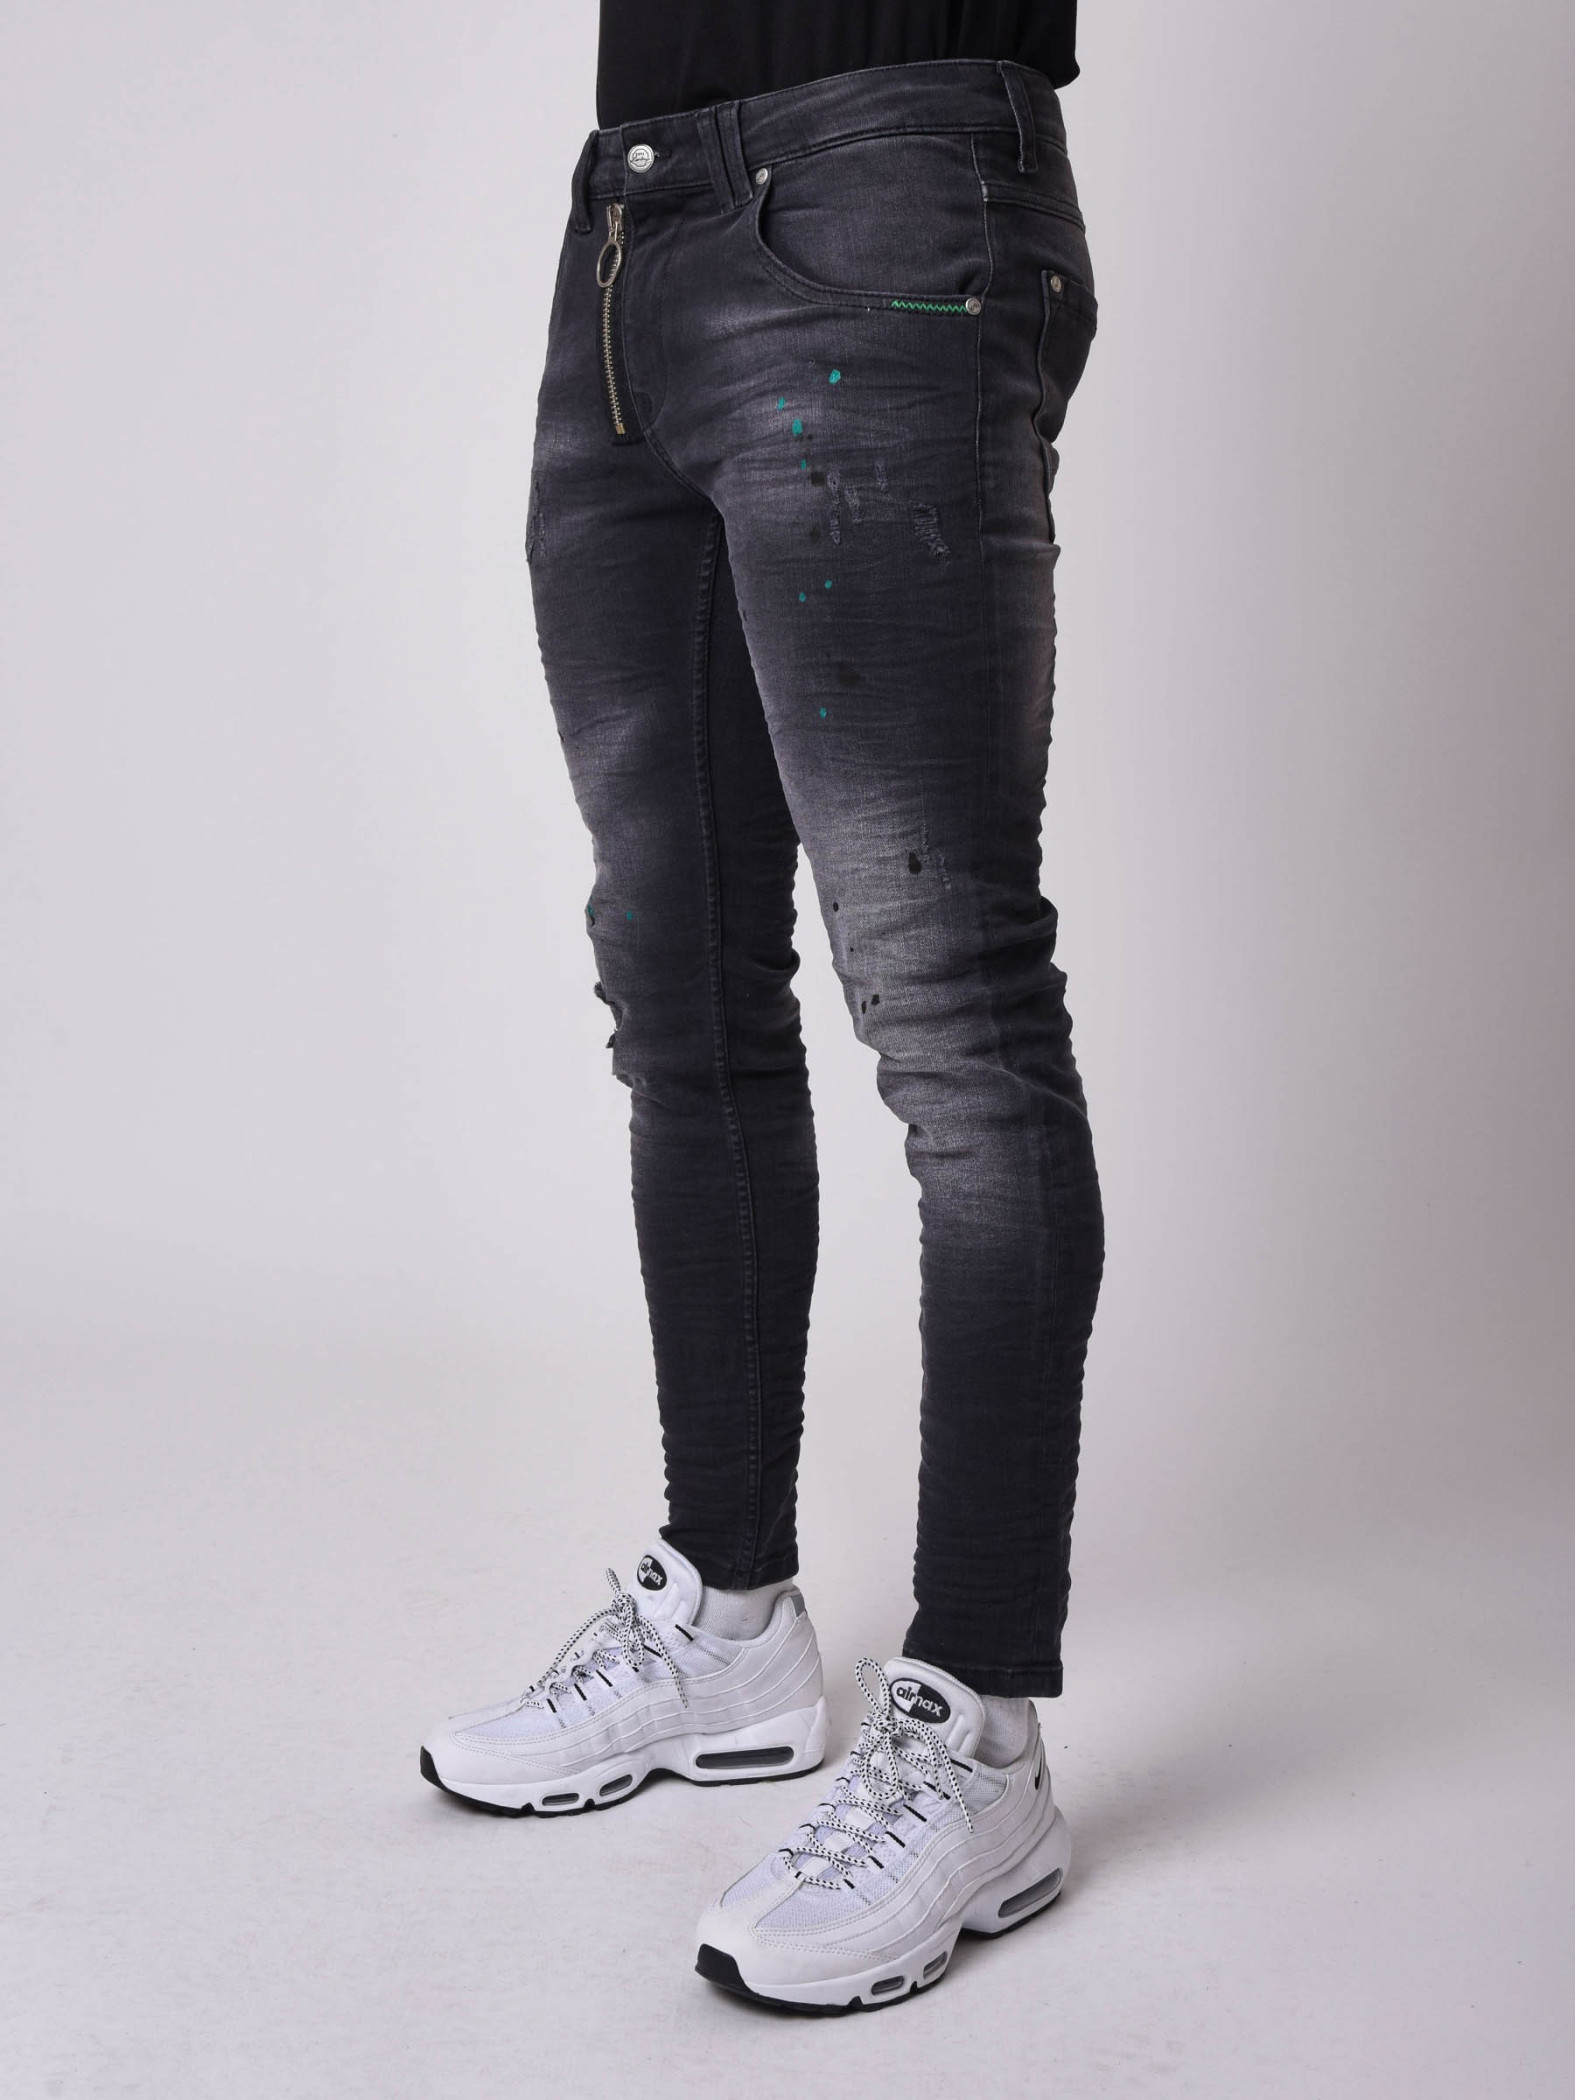 Washed Black Skinny Jeans With Visible Zipper